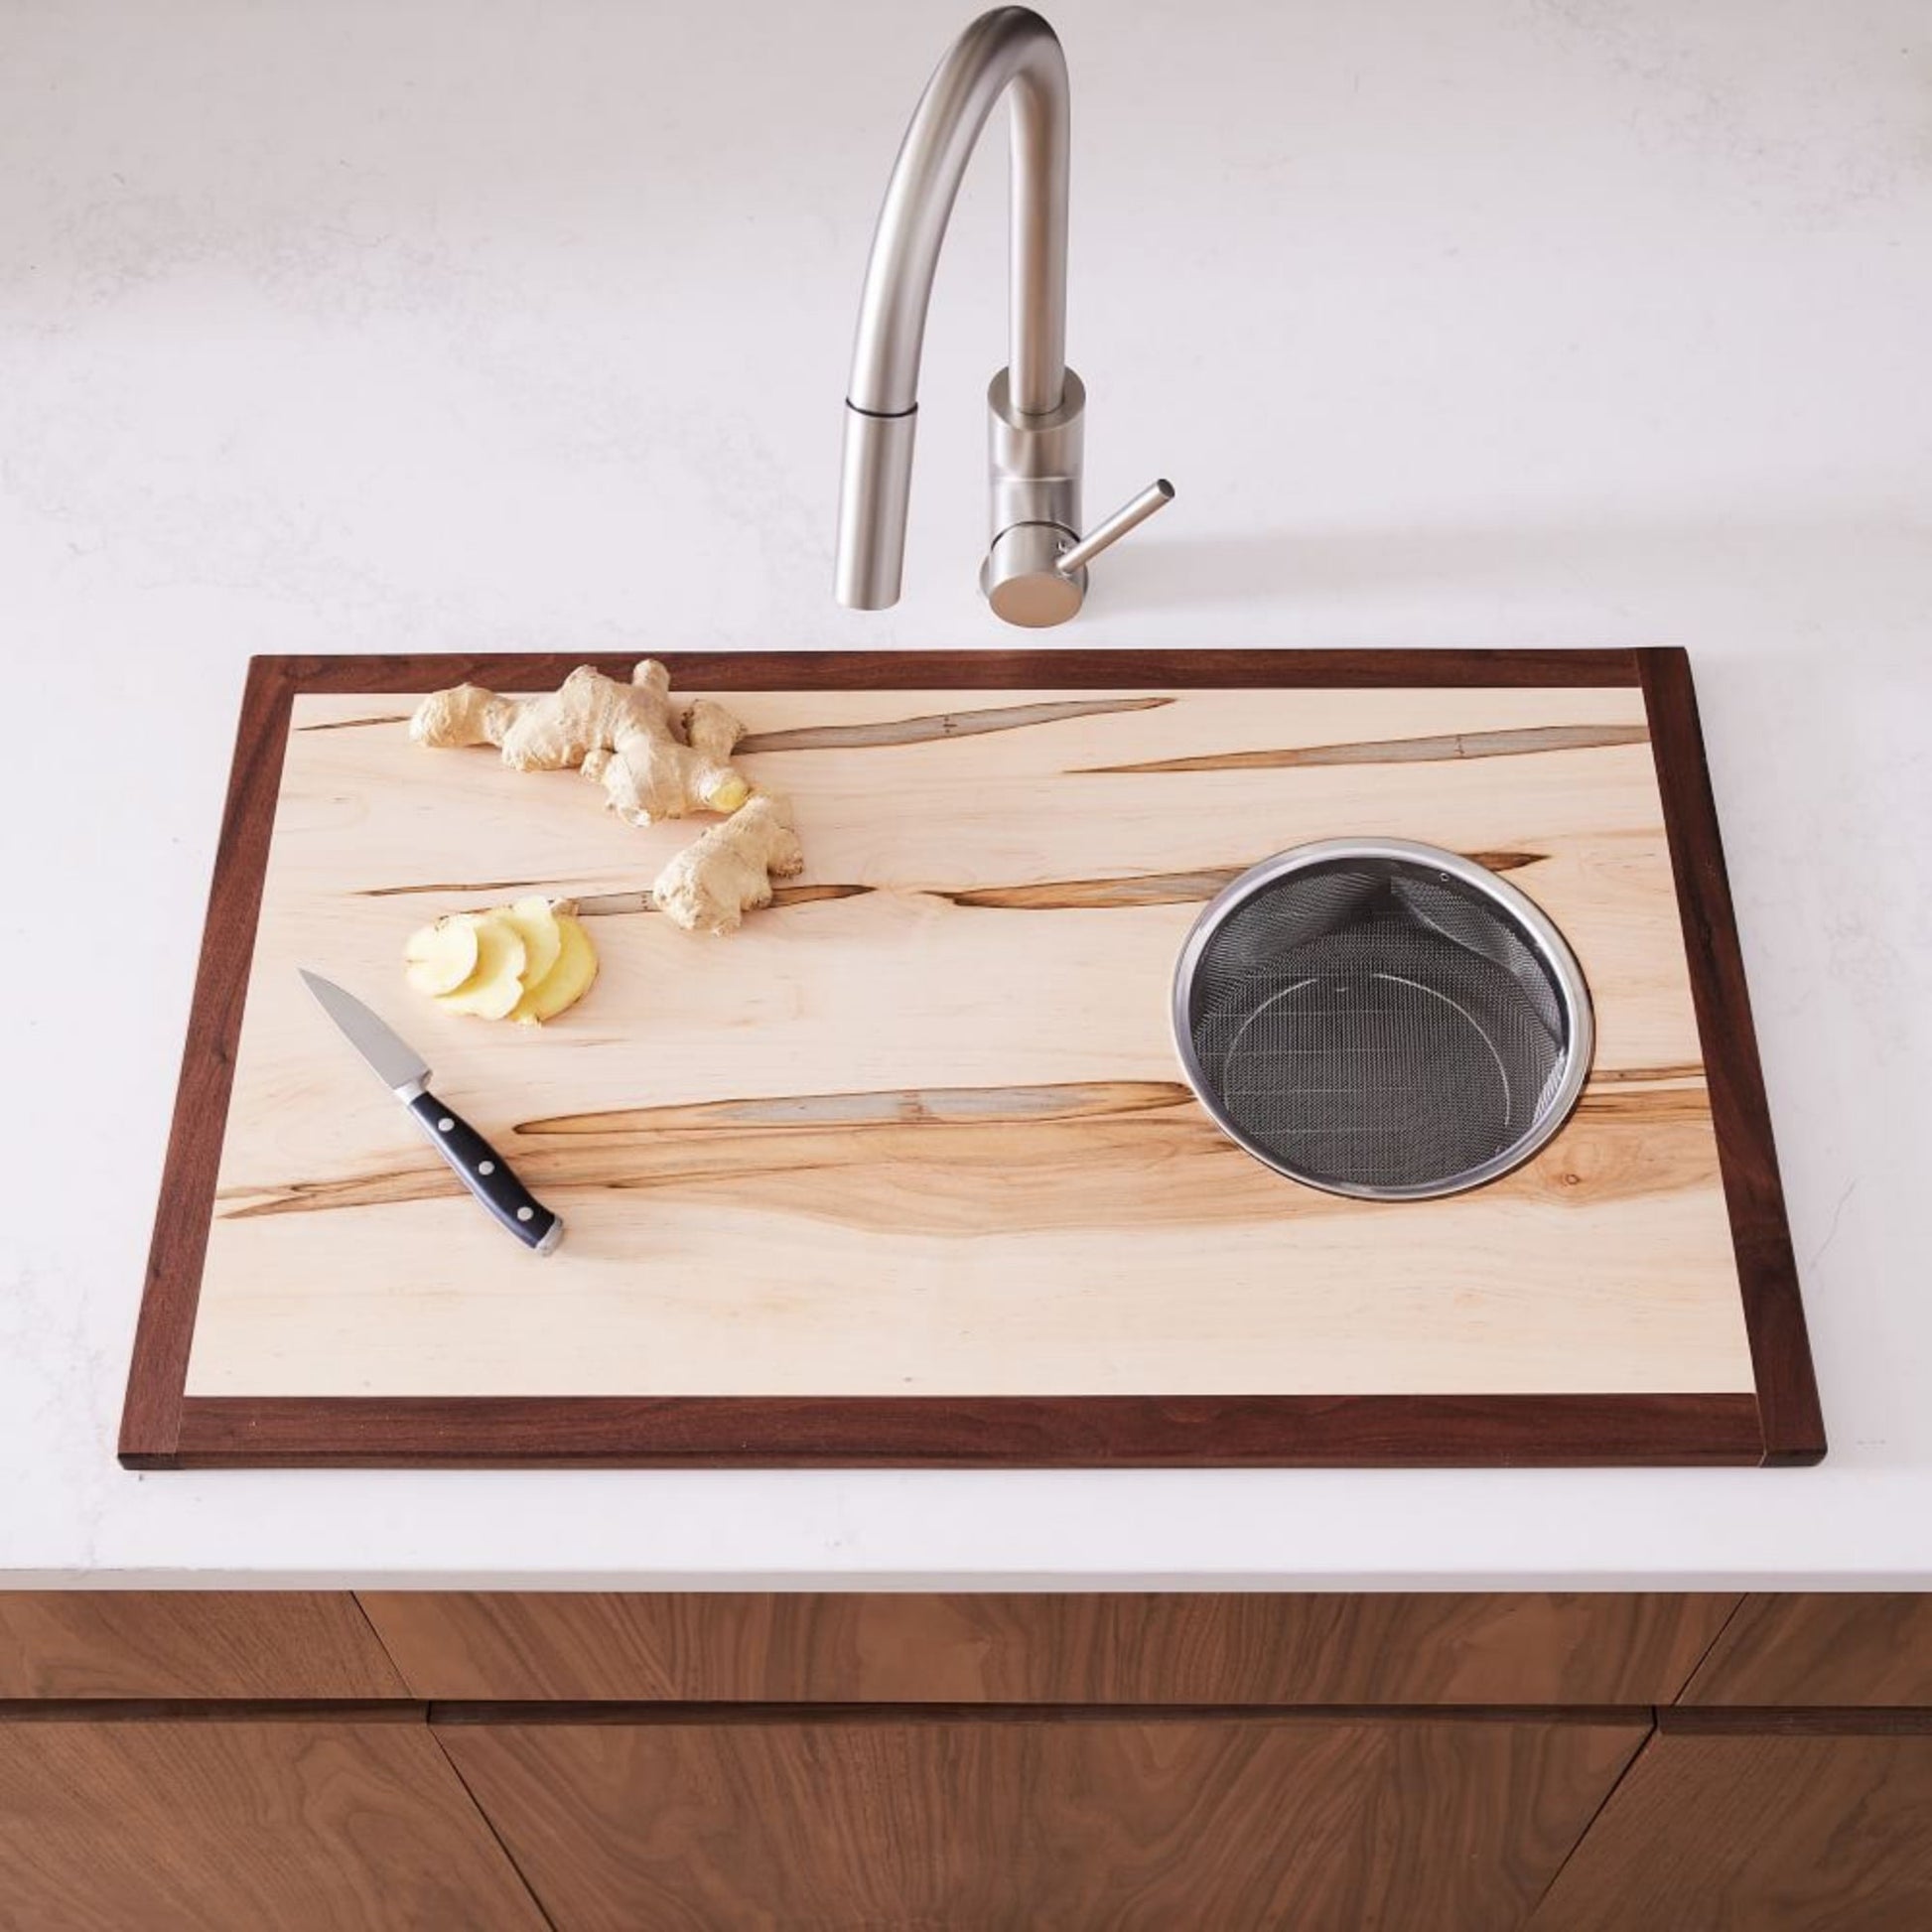 Over-the-Sink Cutting Board w/ Removable Colander|  Handmade Cutting Board | Large Sink Cover Cutting Board for Kitchen Sink